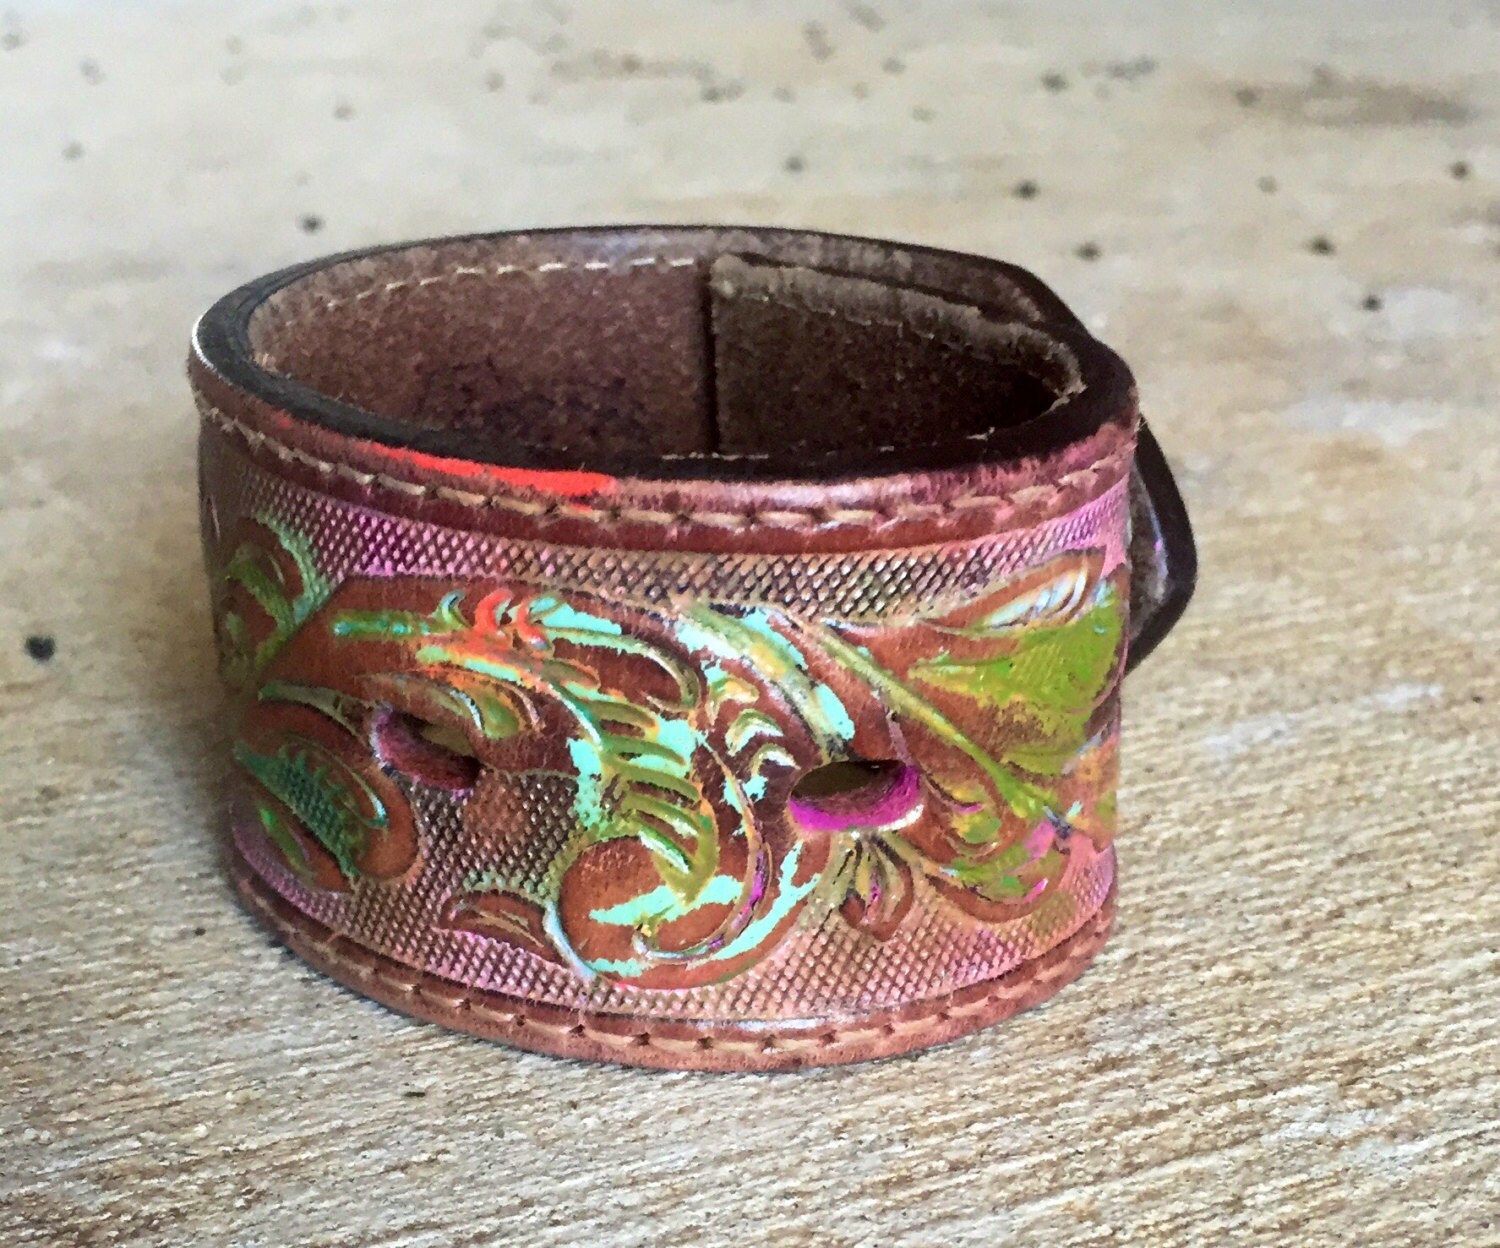 Painted leather cuff. Made from a vintage leather belt has